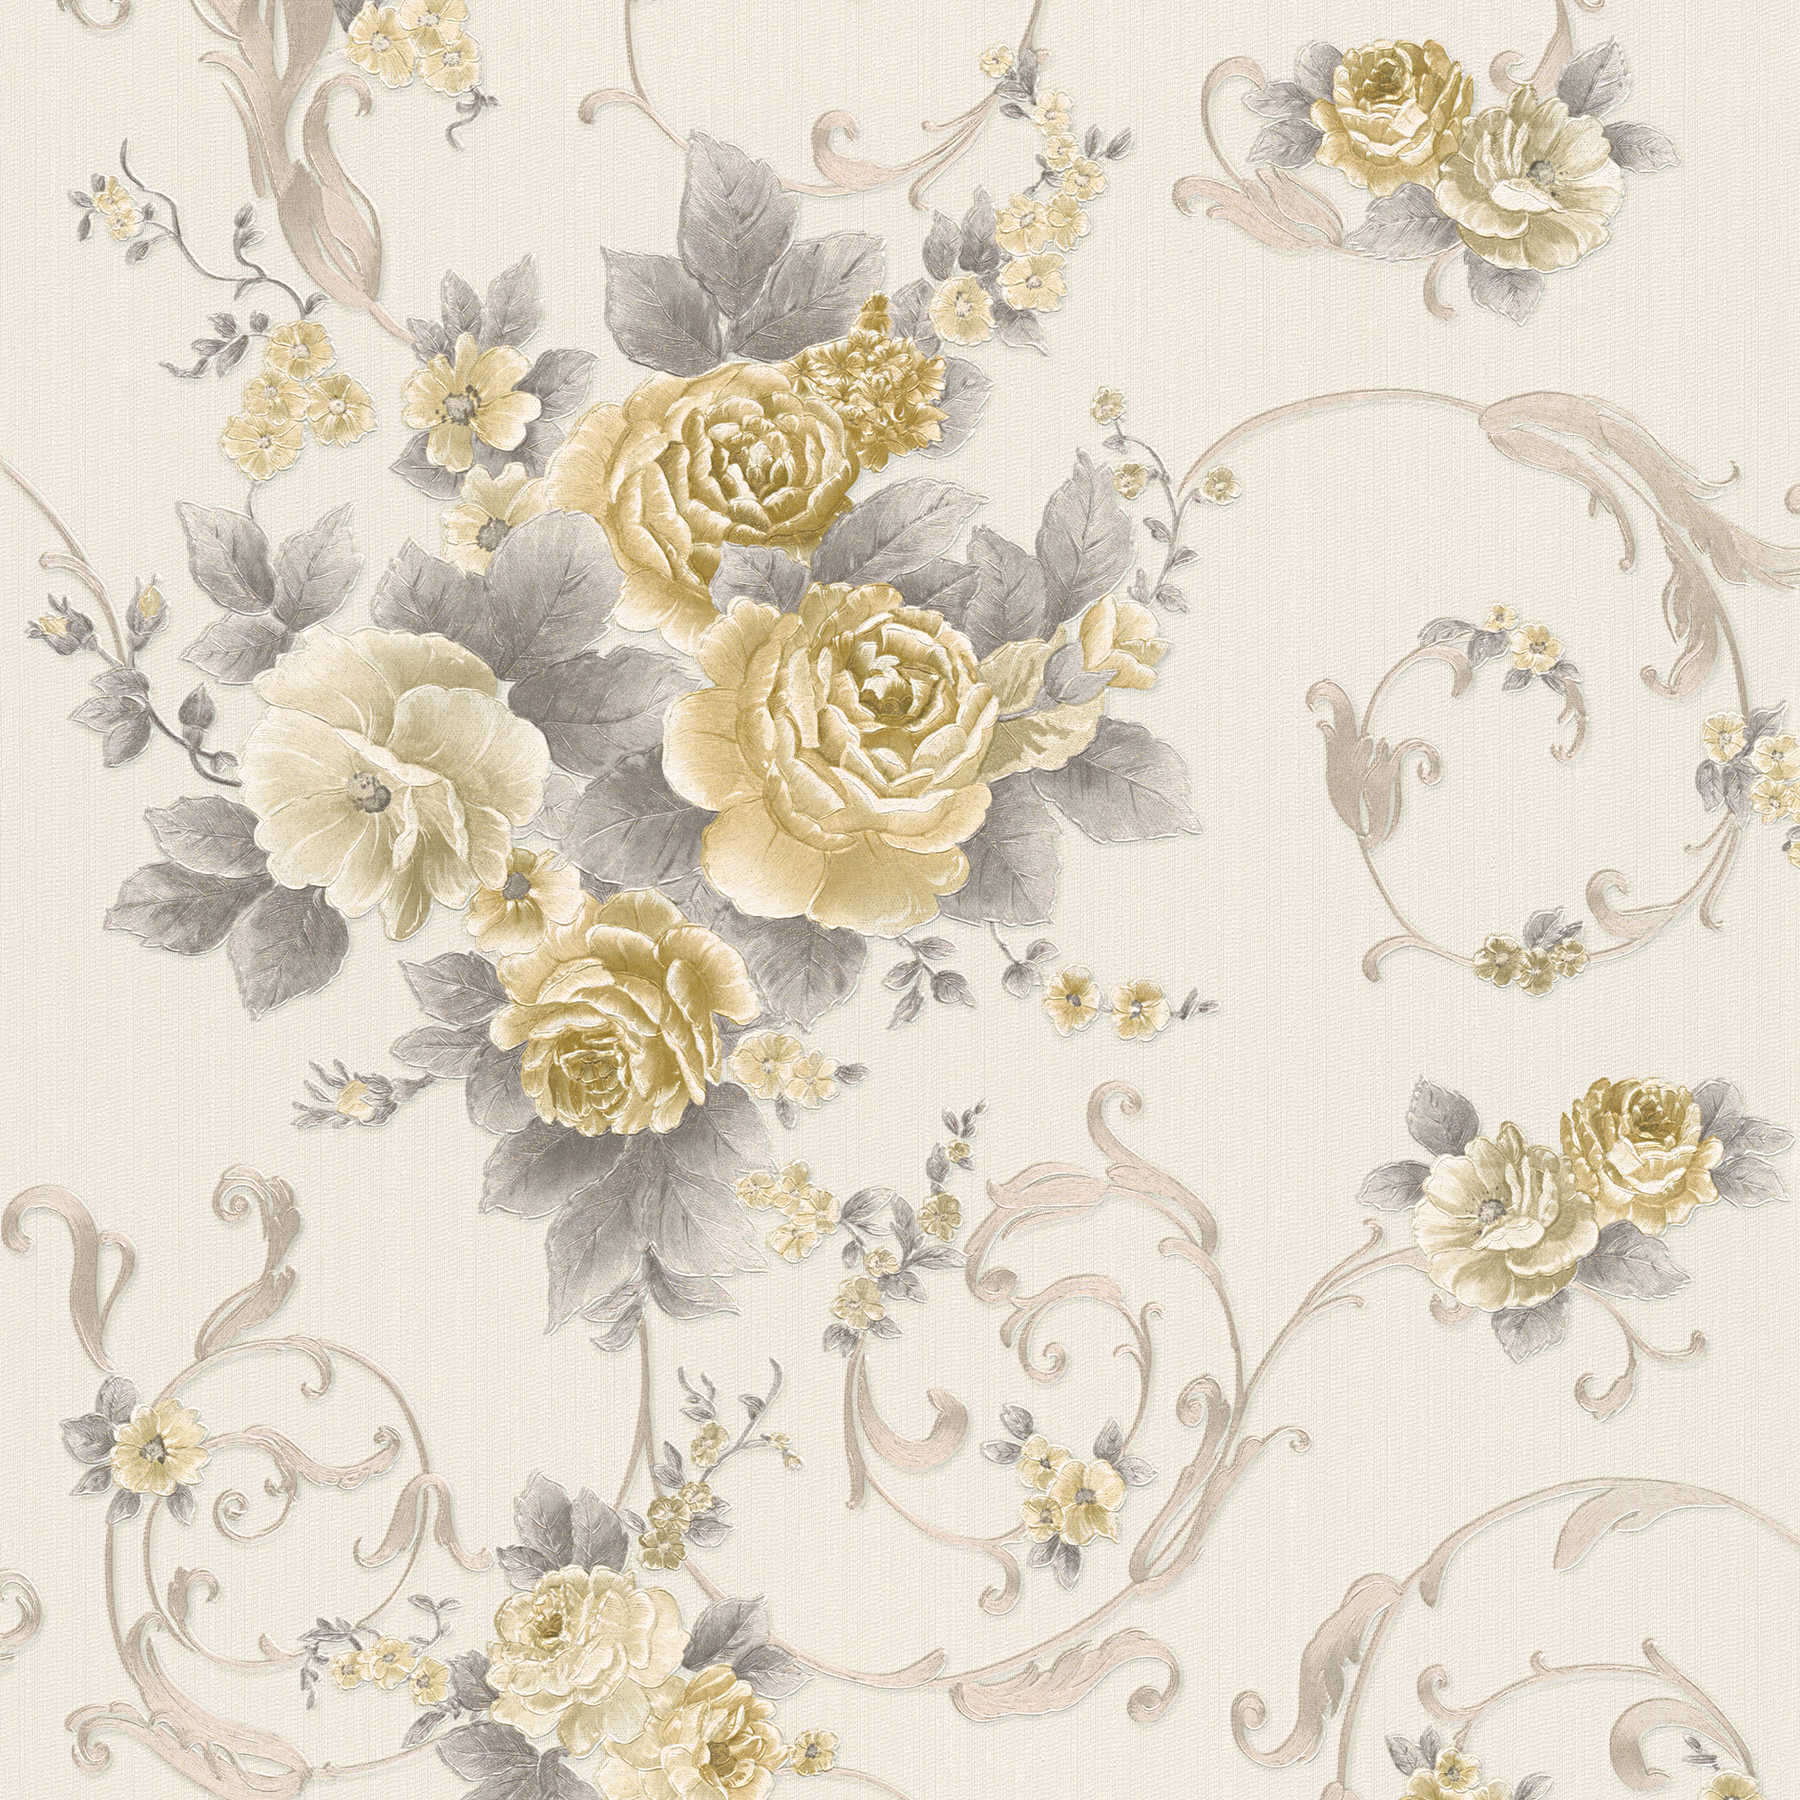 Rose petal wallpaper with metallic effect in country style - grey, gold, white
